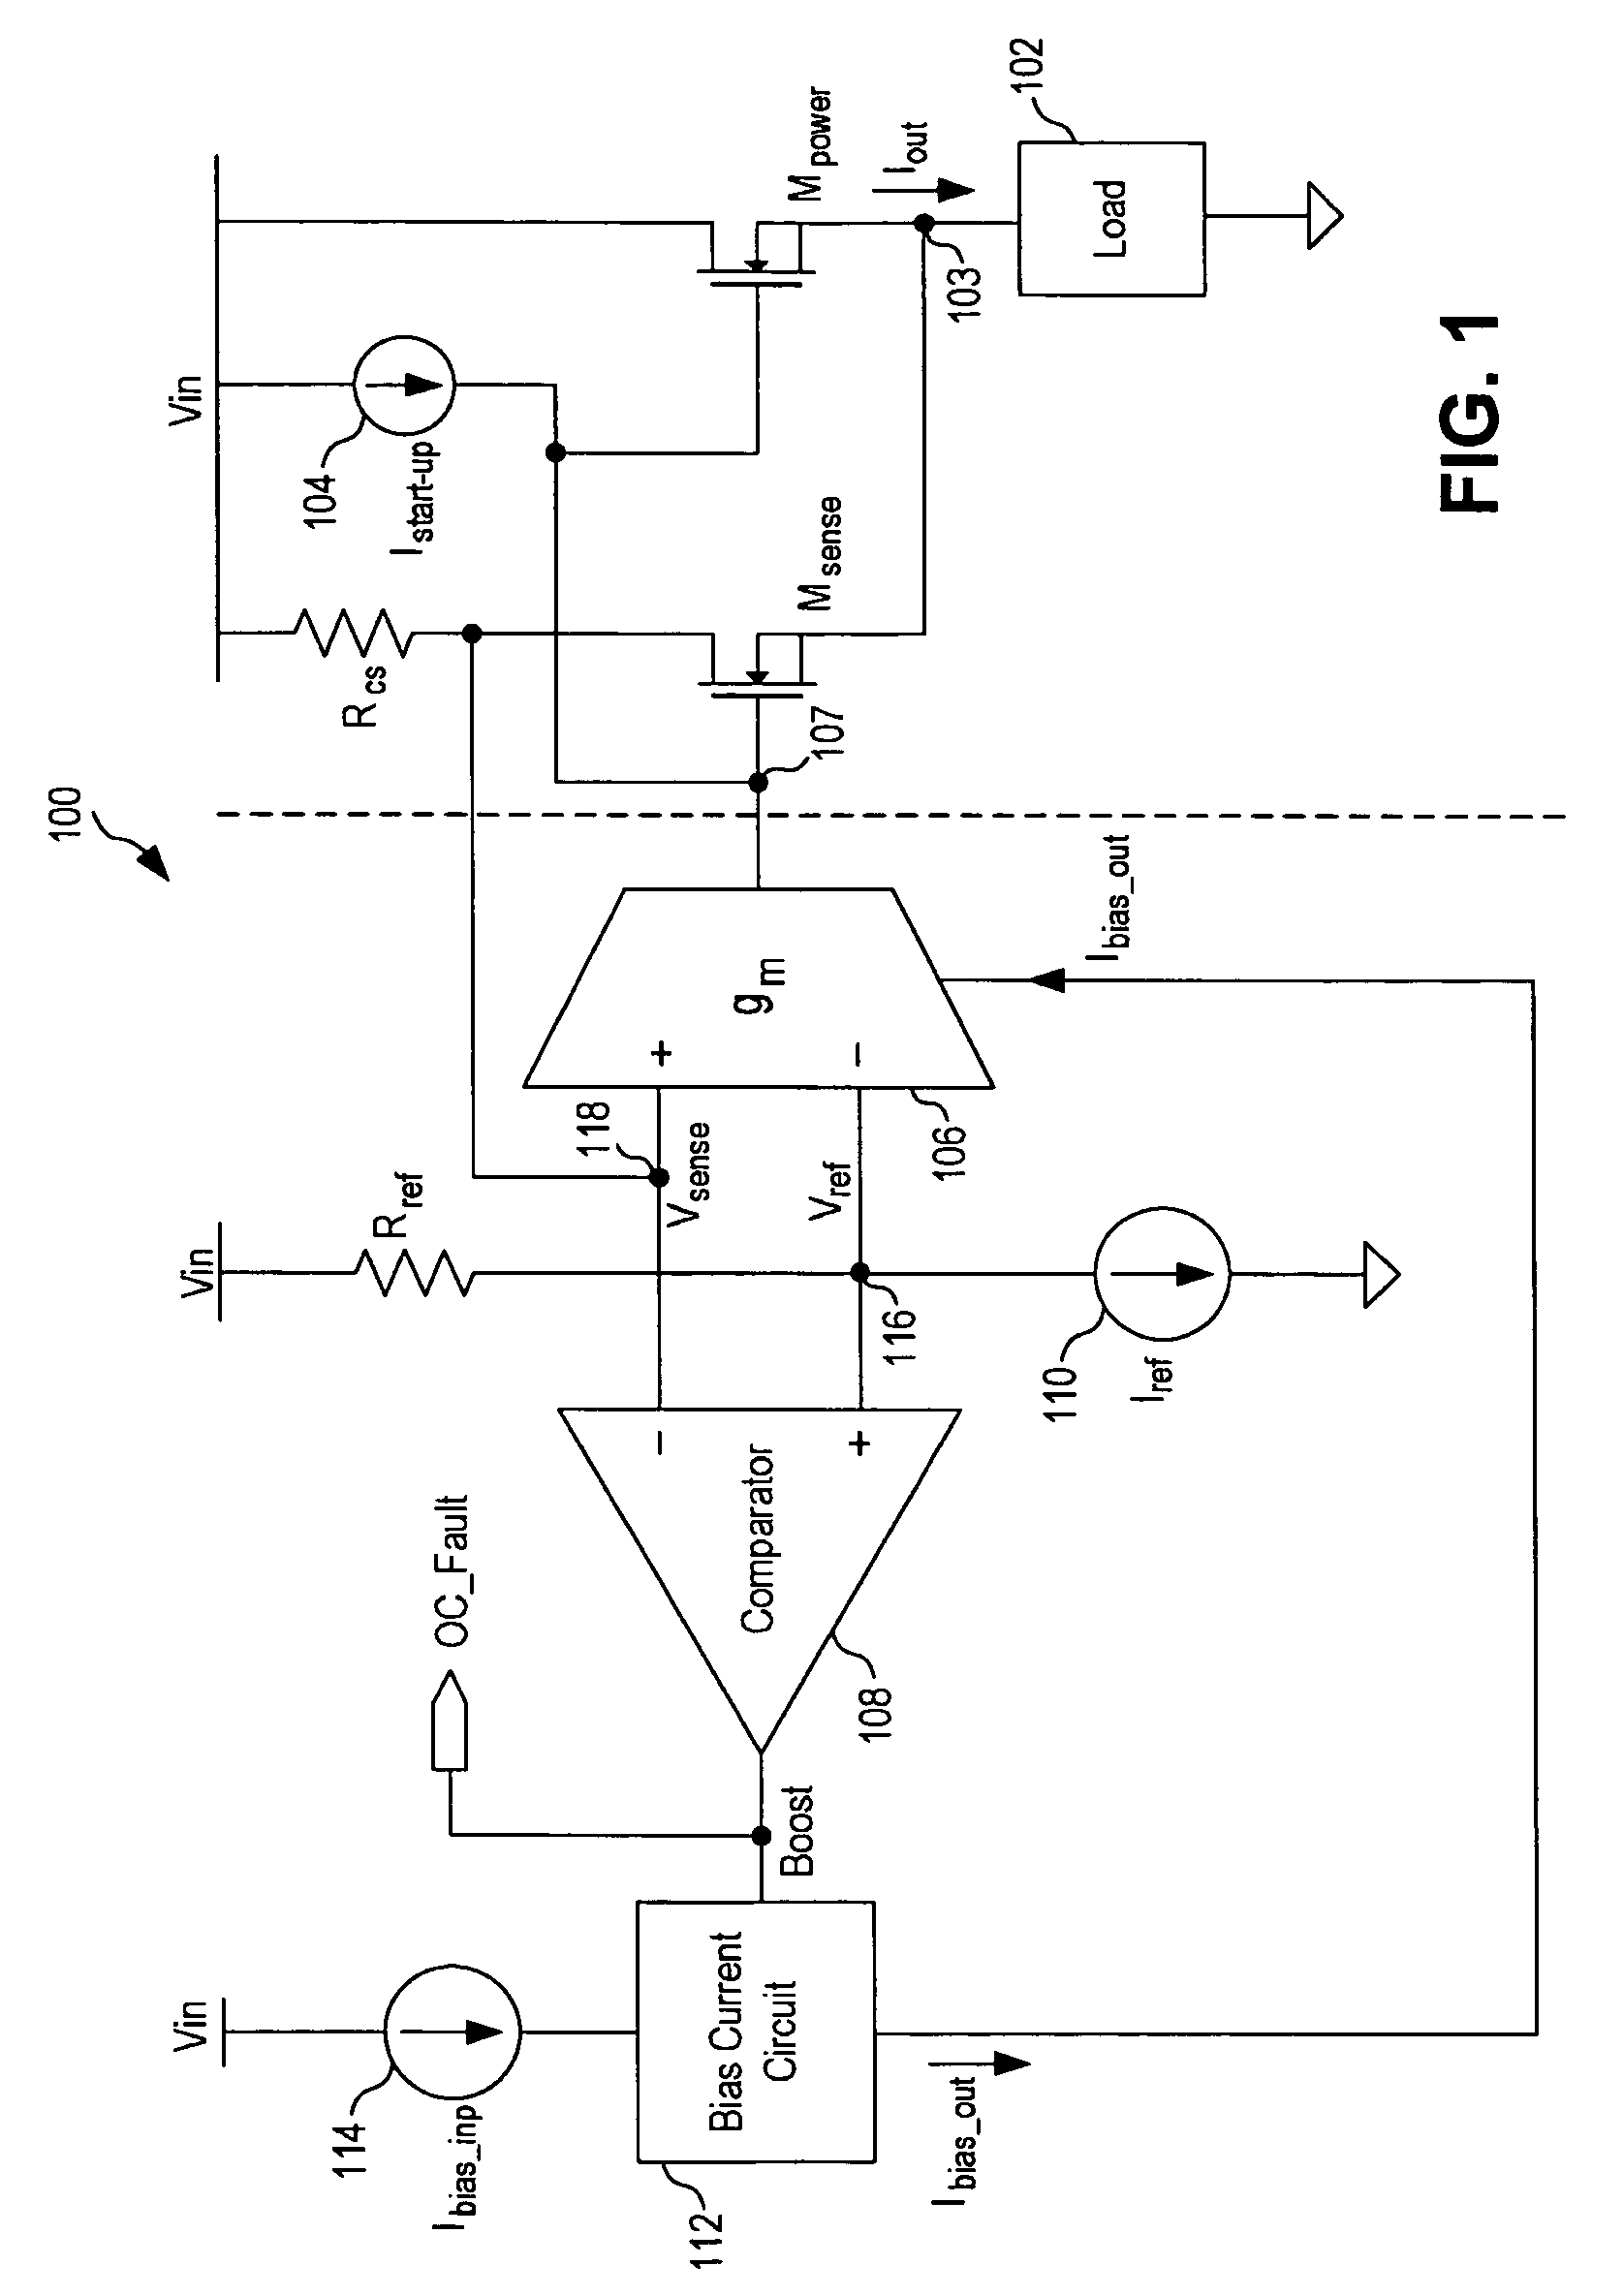 Overcurrent protection circuit with fast current limiting control